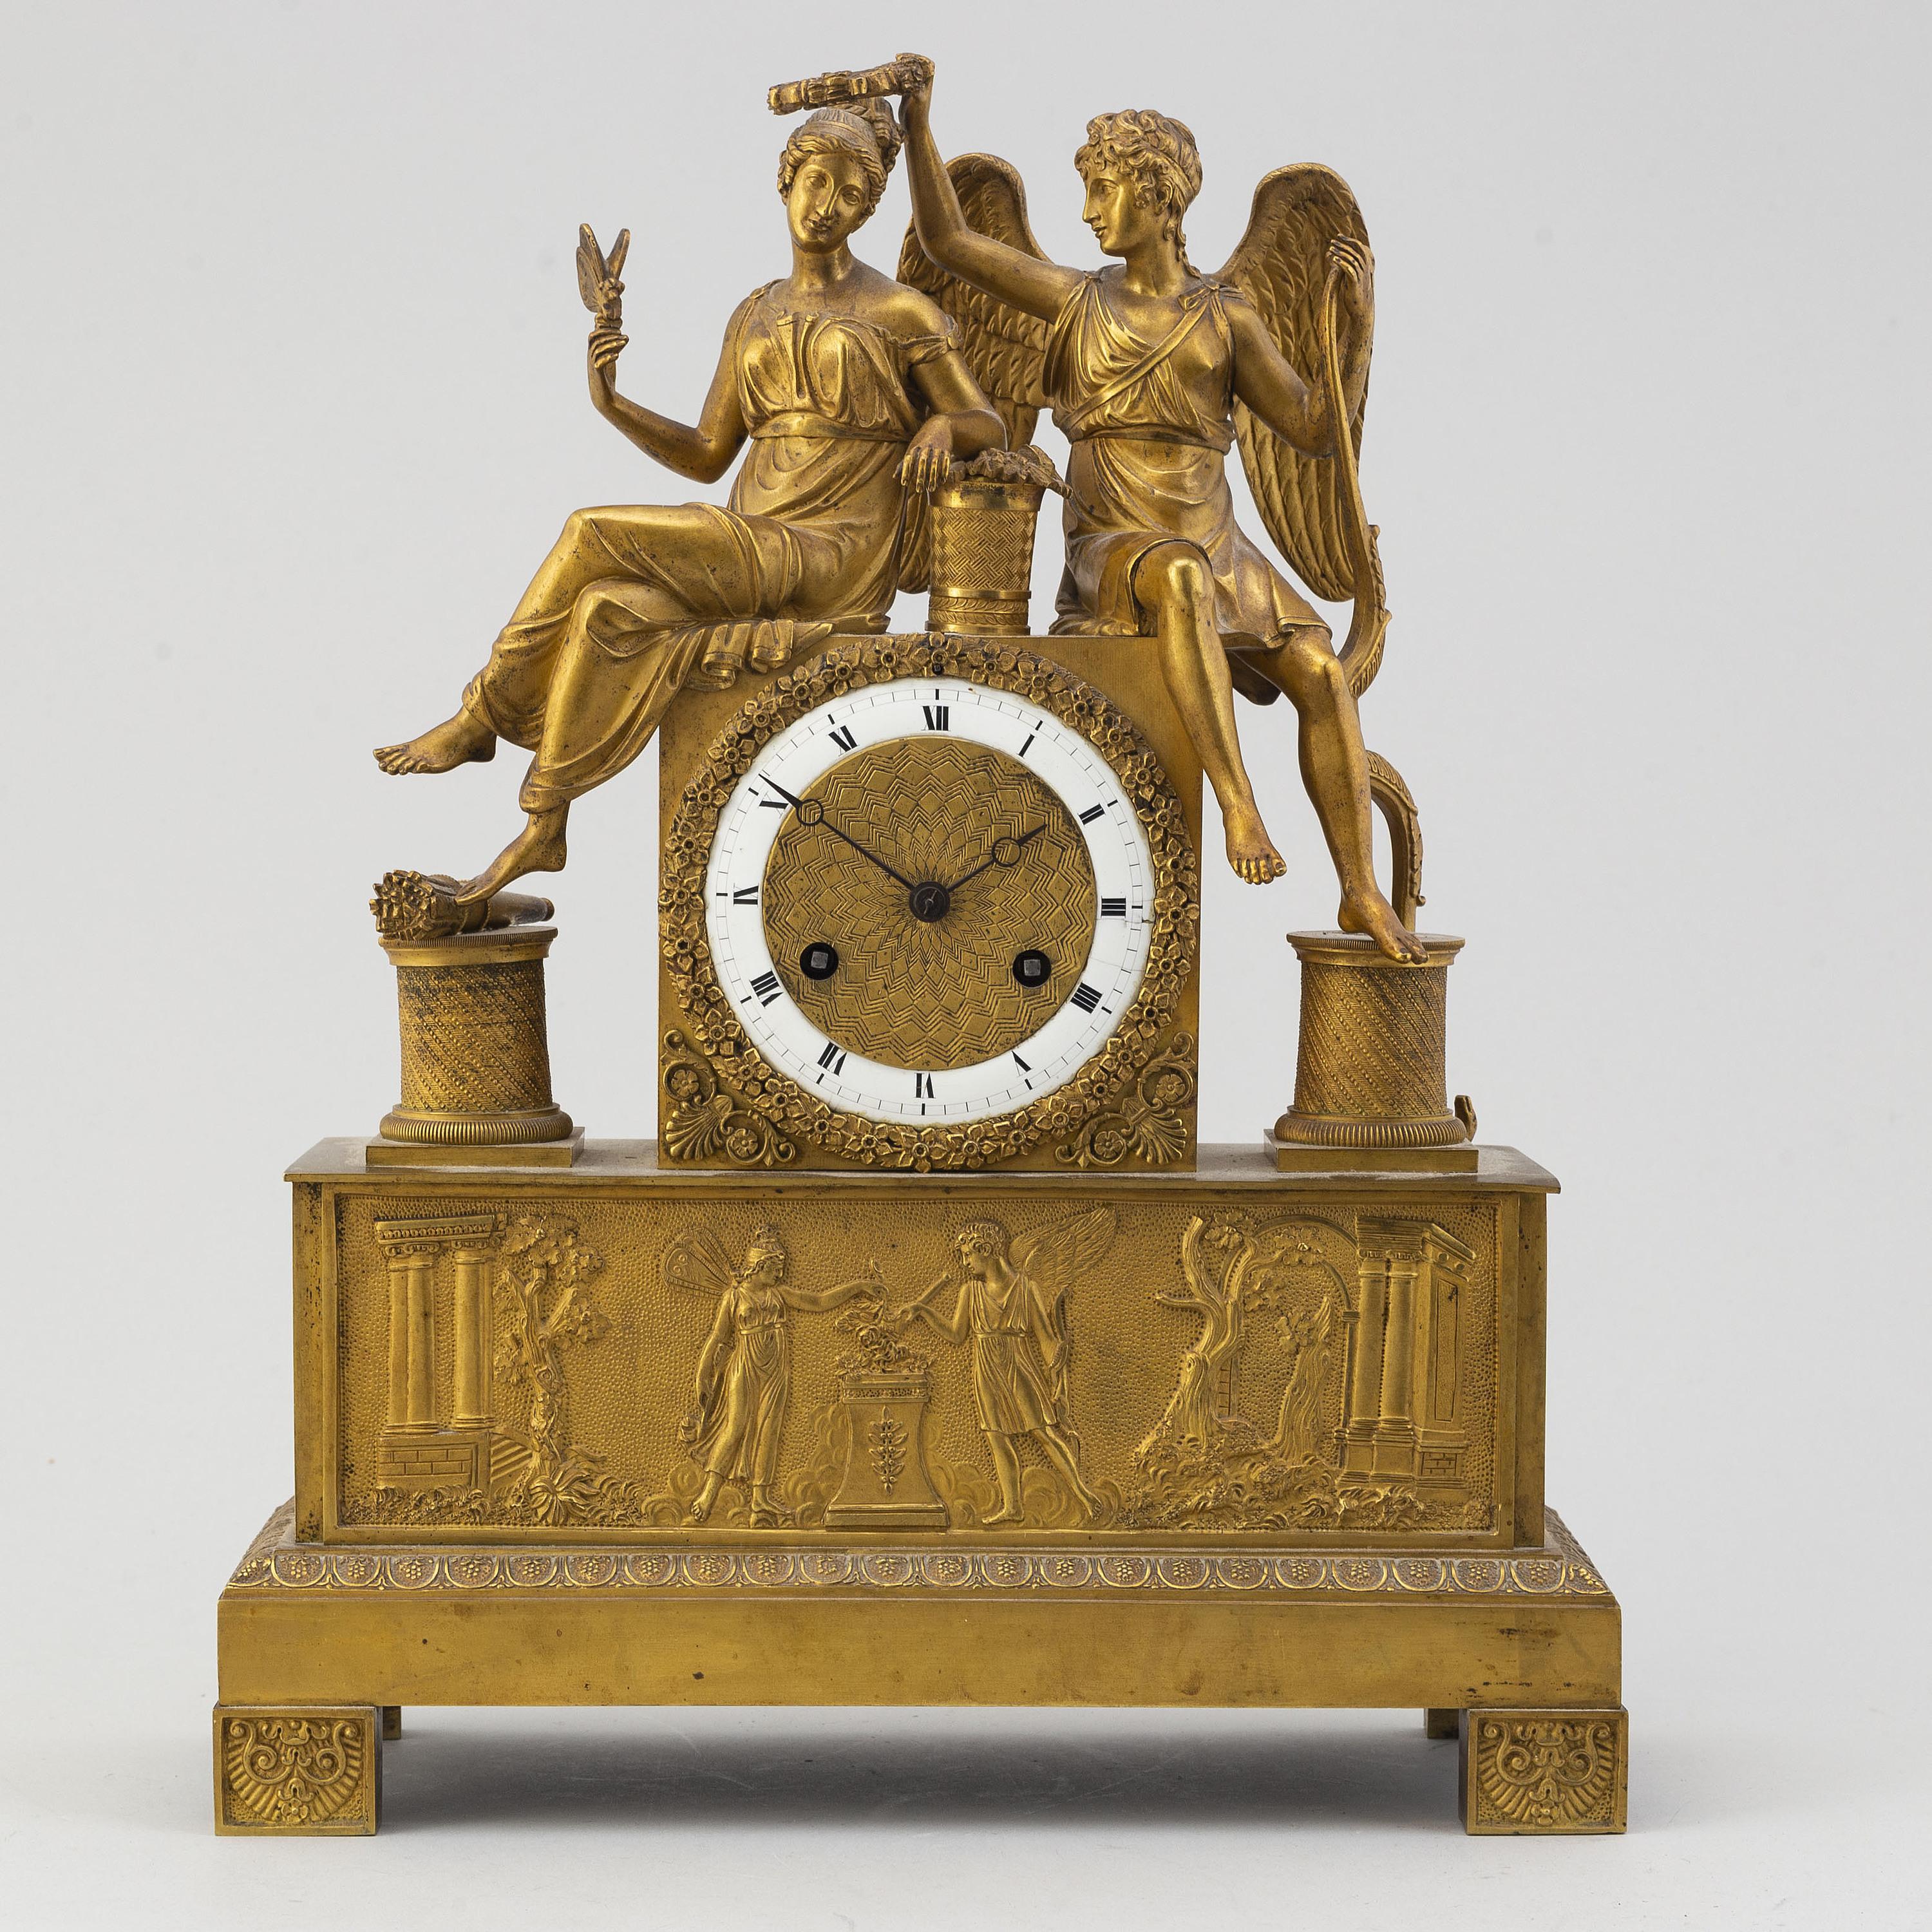 A French Empire table clock, first half of the 19th century.
Measures: Width 30, depth 11, height 38 cm. Key included.
Later added hatch at back. Function not tested but can restored or inspected by clock specialist upon request and for additional